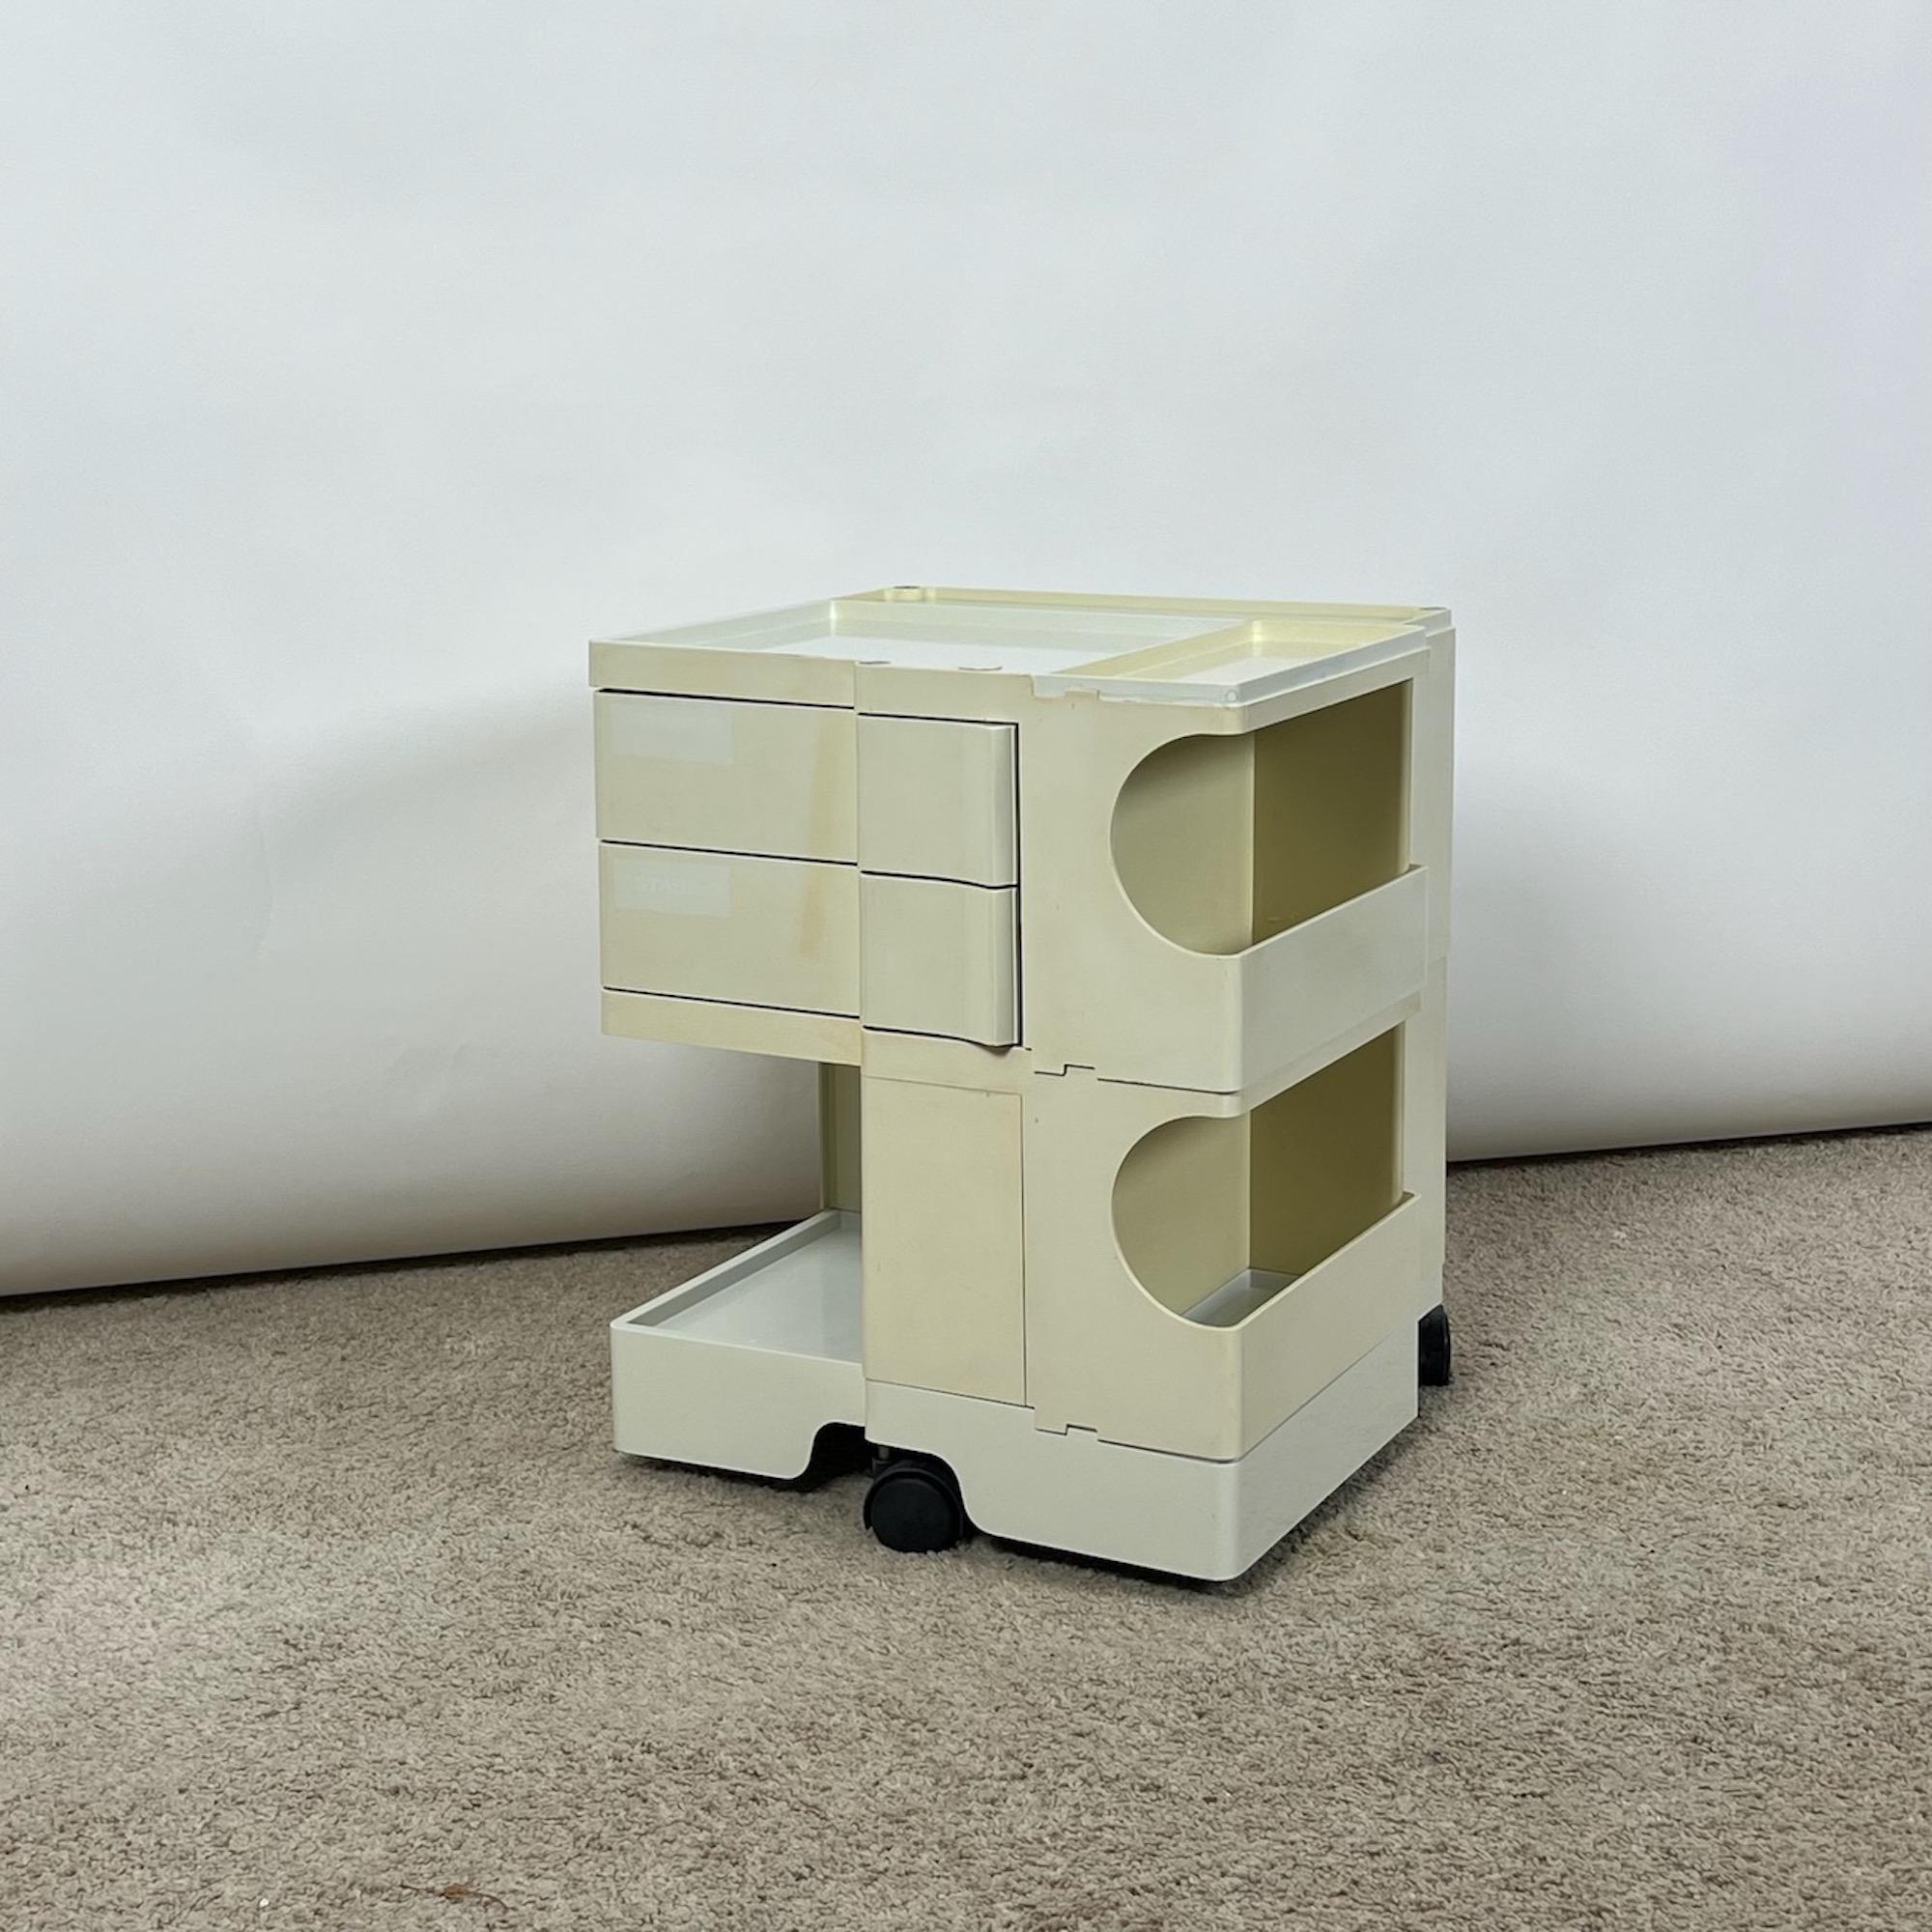 Late 20th Century Iconic Boby Trolley by Joe Colombo - Space Age Award Winning Cabinet, 1970s For Sale